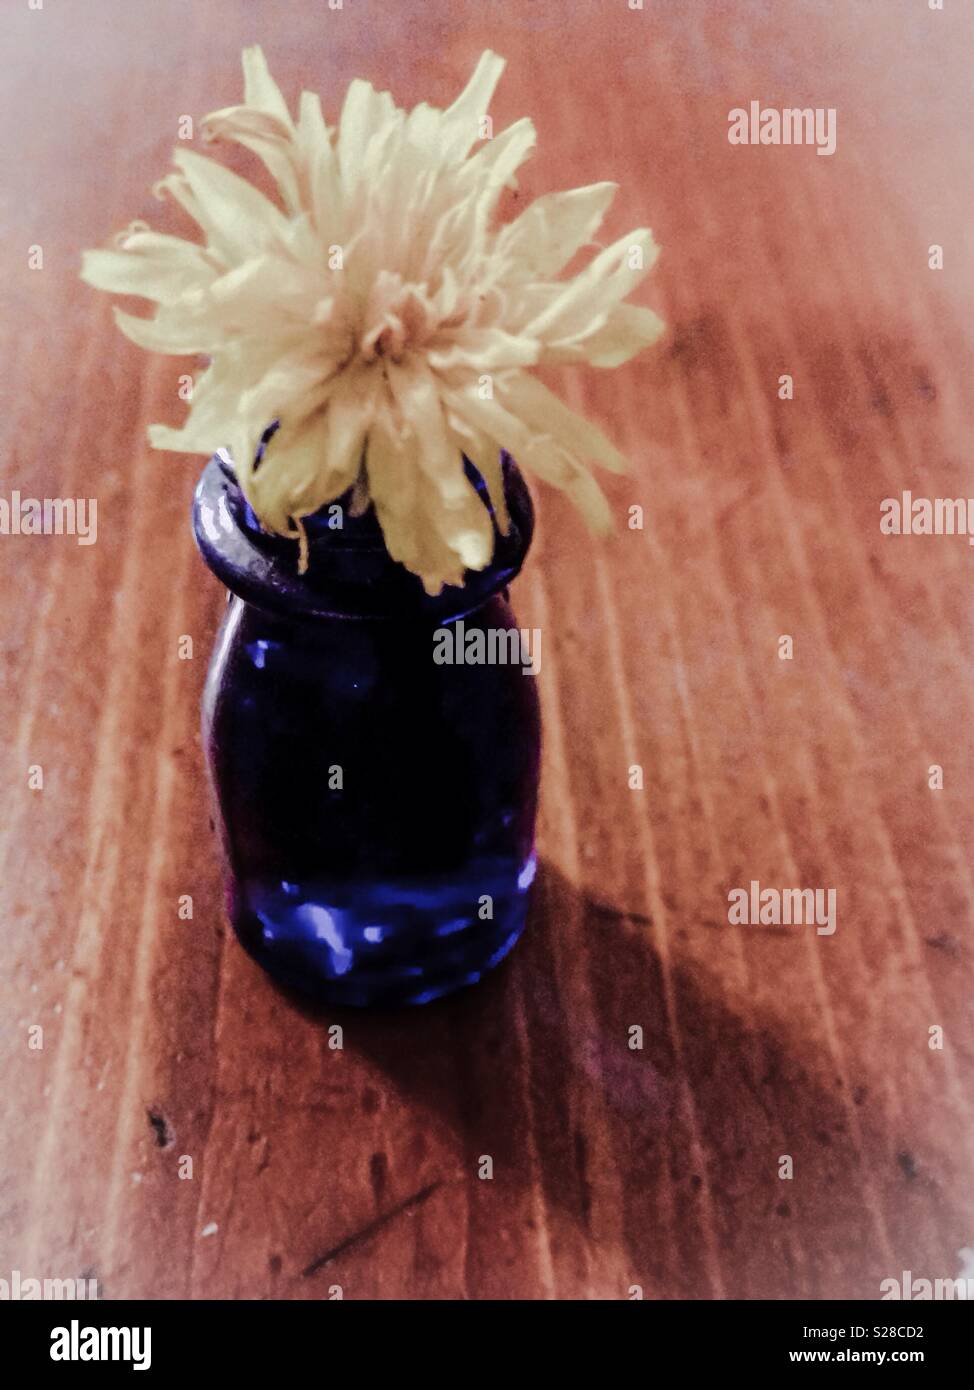 Pale dandelion blossom in tiny cobalt glass bottle on wooden surface Stock Photo